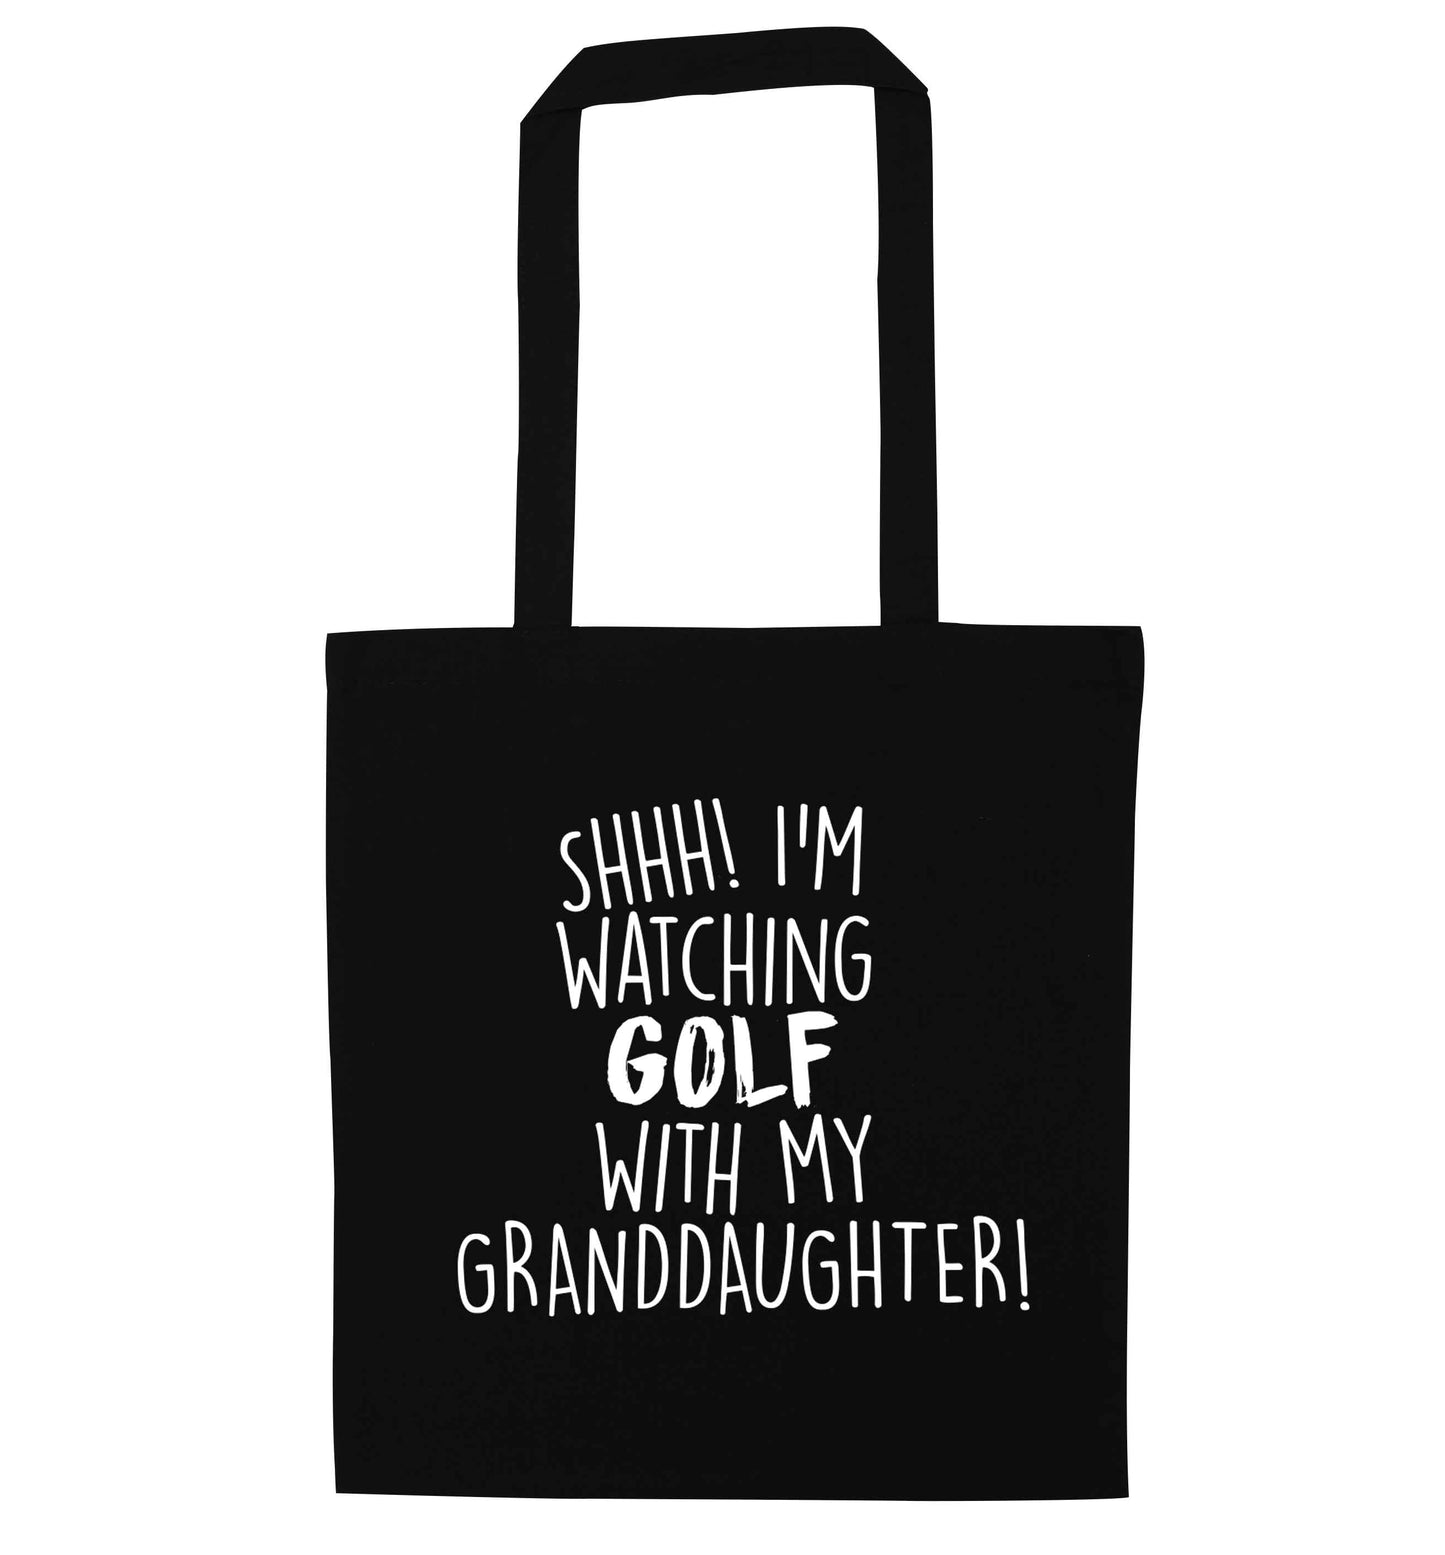 Shh I'm watching golf with my granddaughter black tote bag